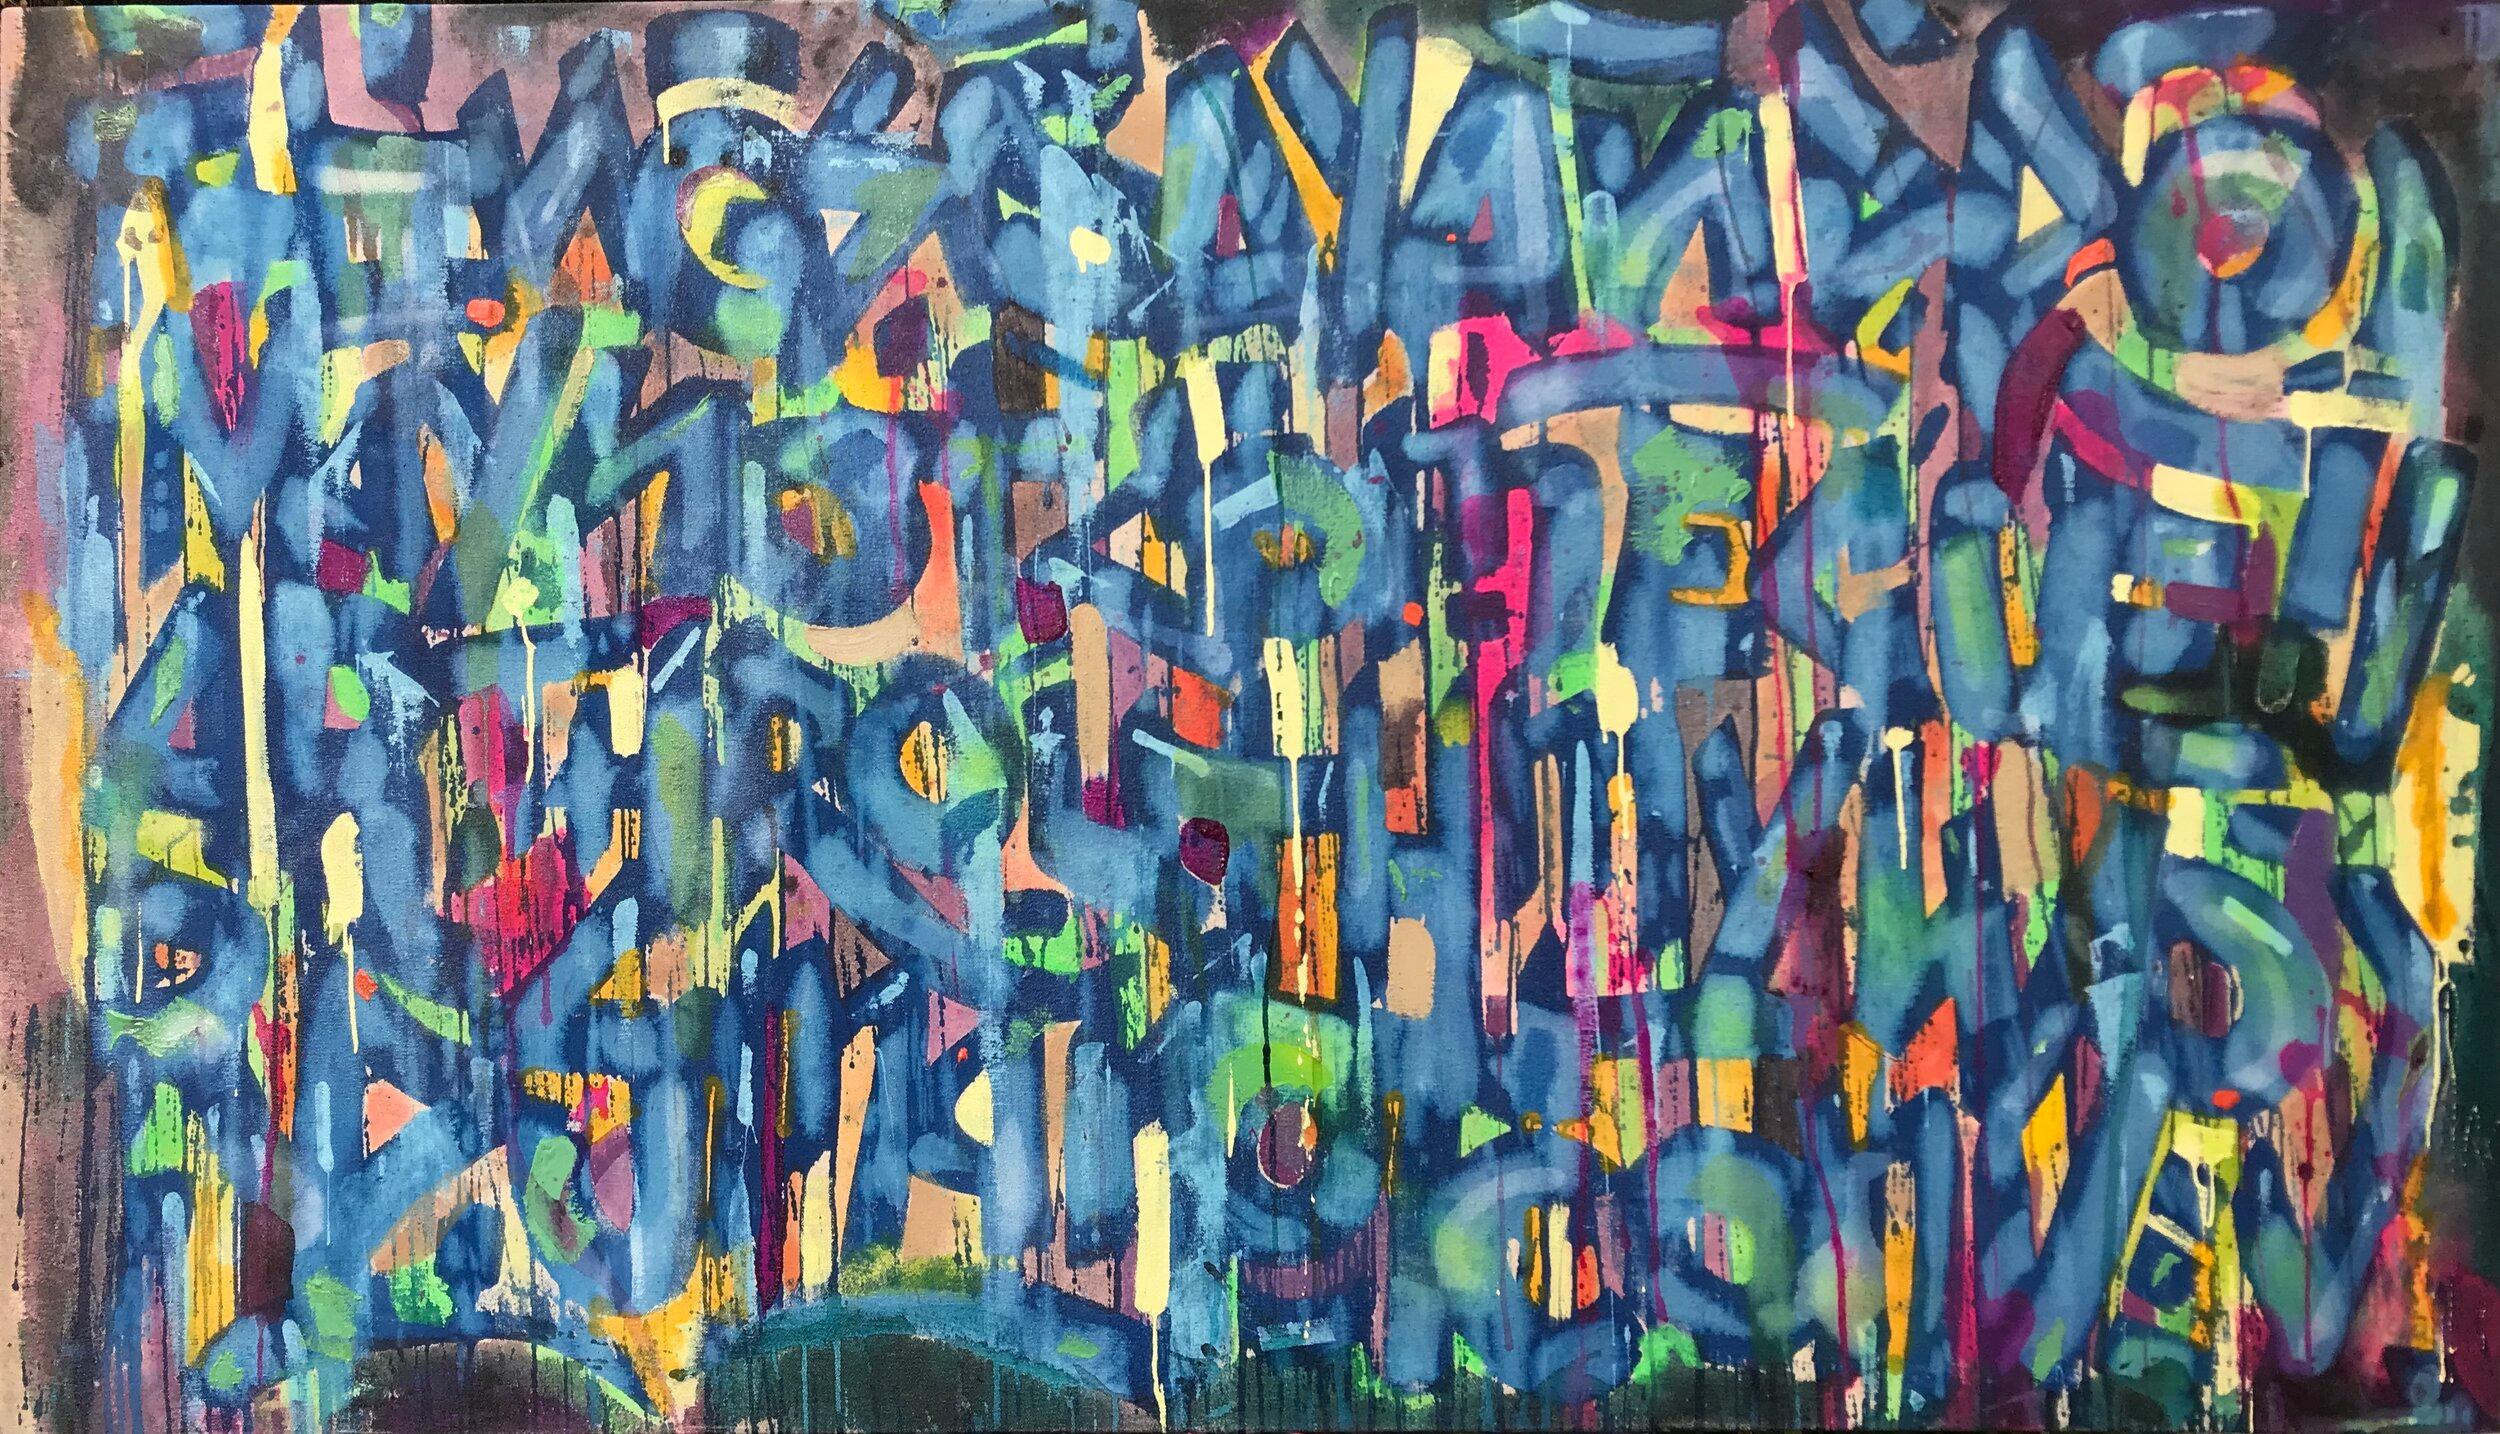 "Determination", Text-based Abstract Expressionist Painting 